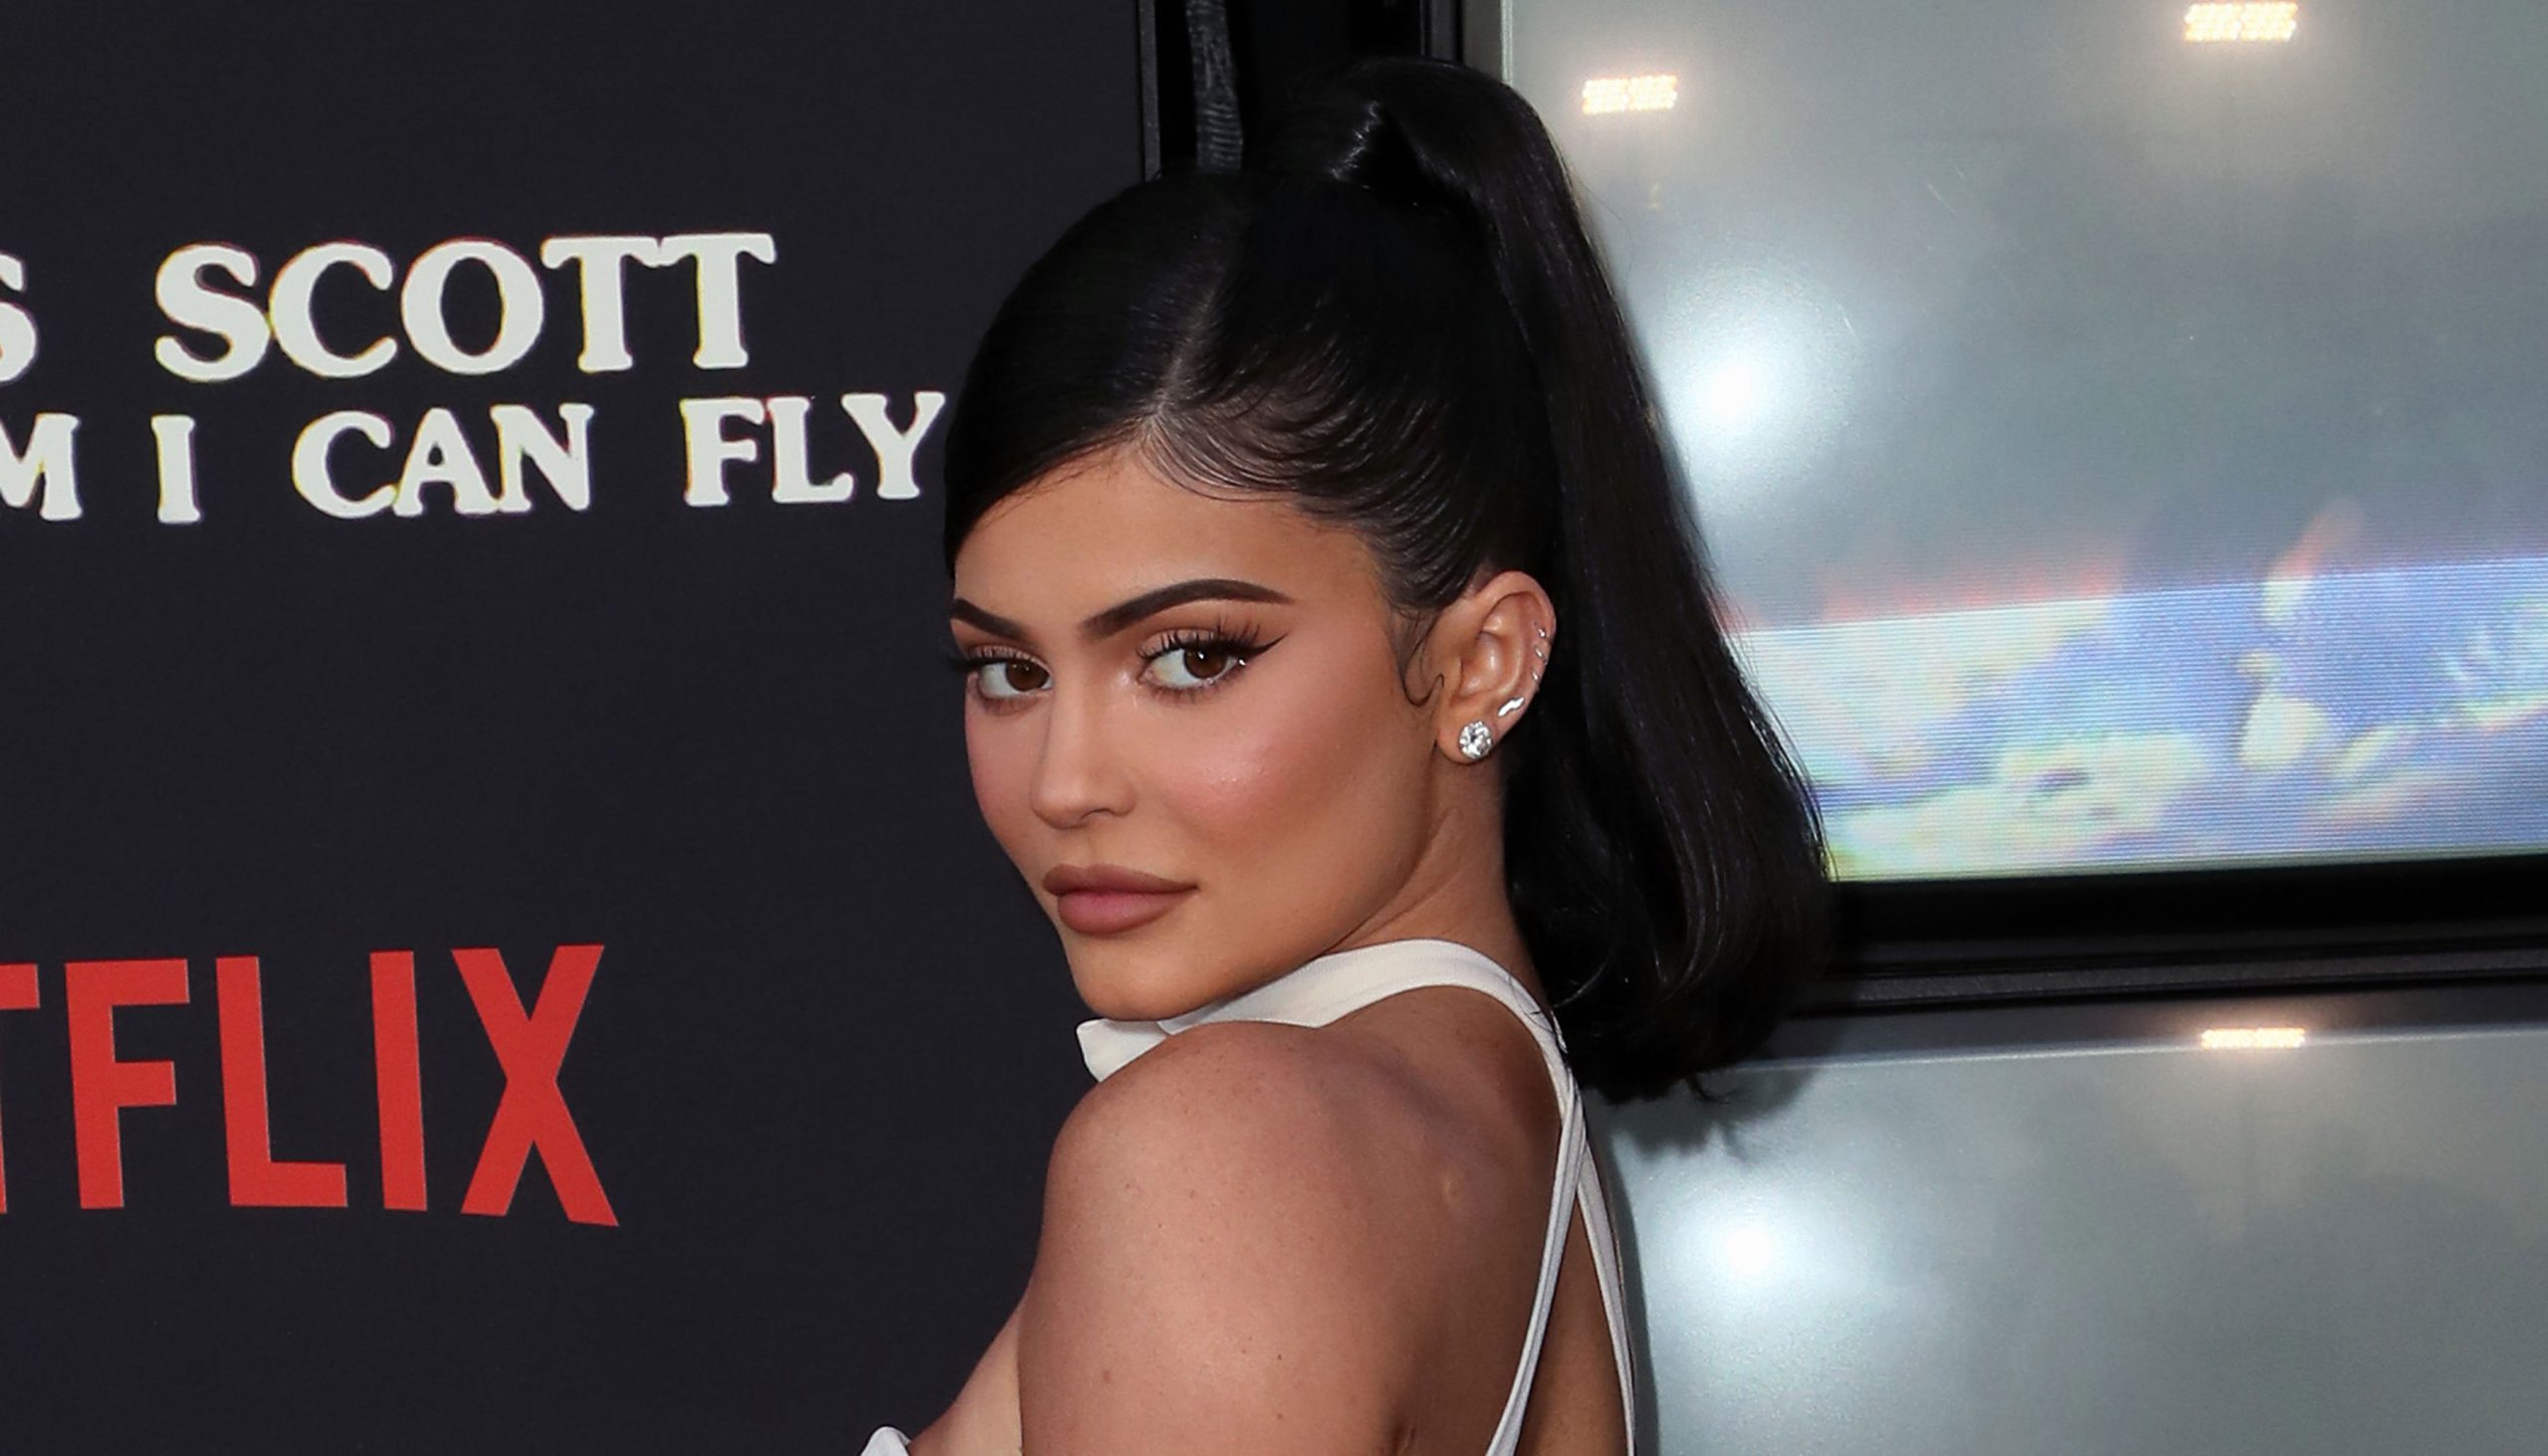 Kylie Jenner Debuts a Sleek White Manicure on the Cover of 